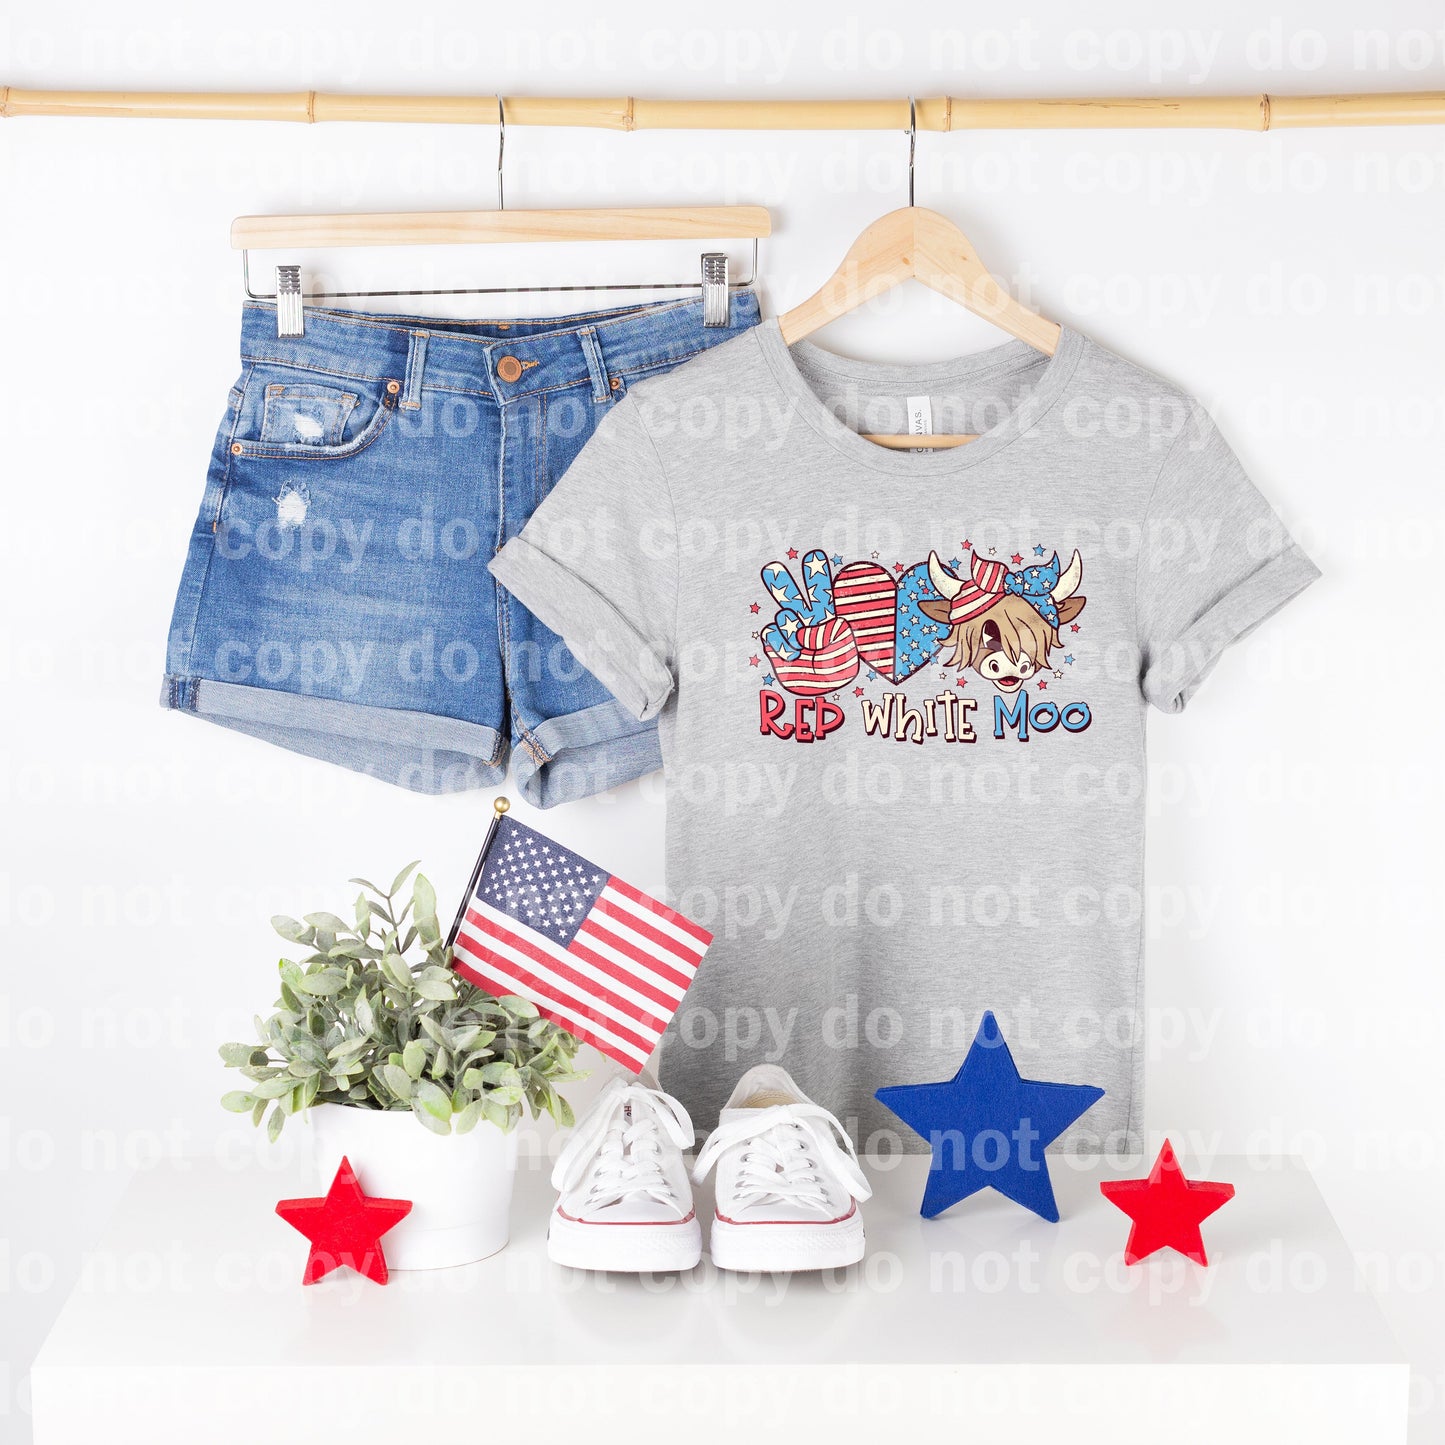 Red White Moo Girl Dream Print or Sublimation Print